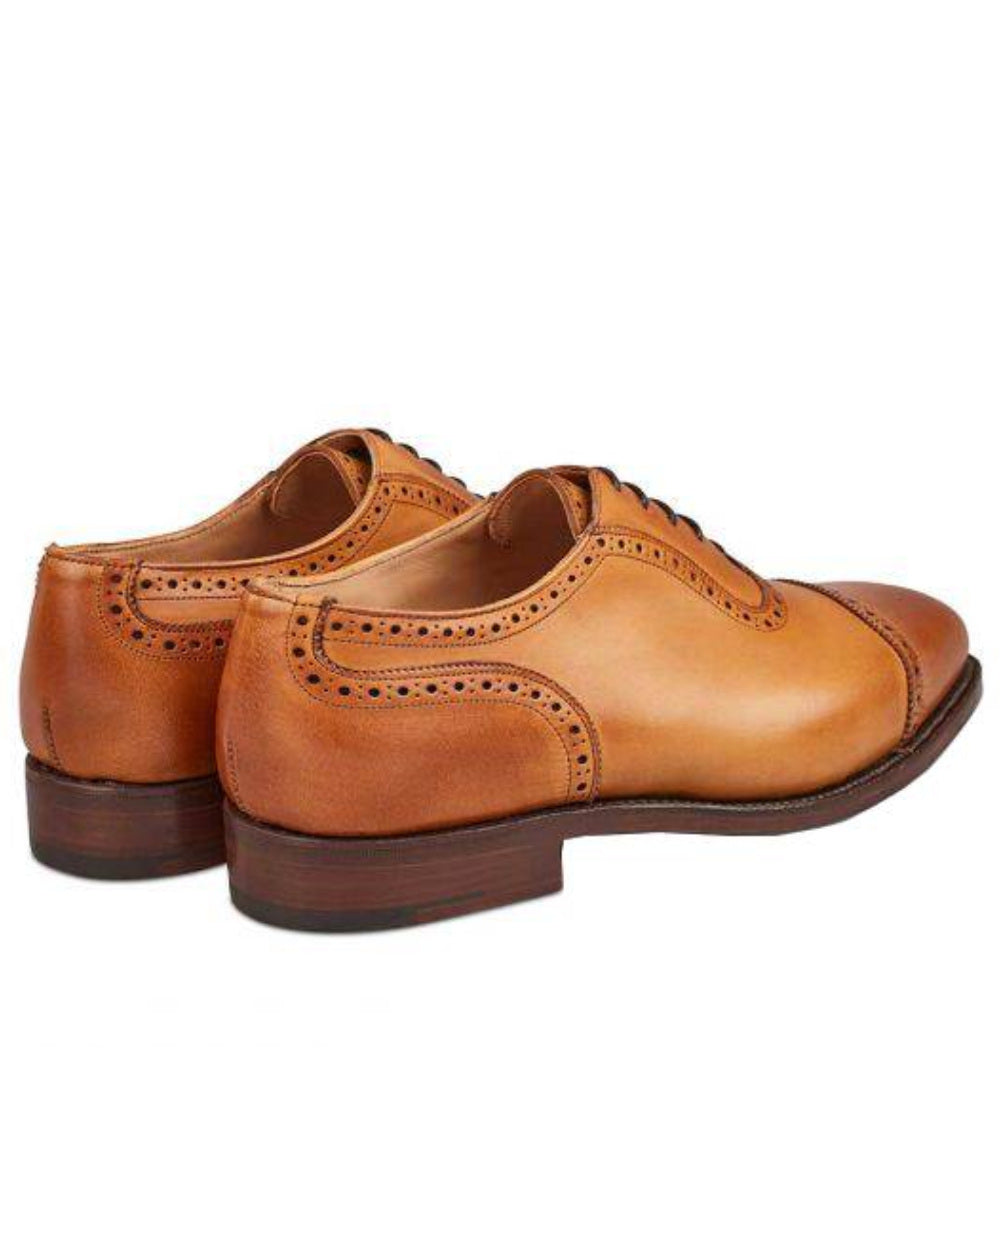 Burnished Coloured Trickers Belgrave Toecap Oxford City Shoe On A White Background 